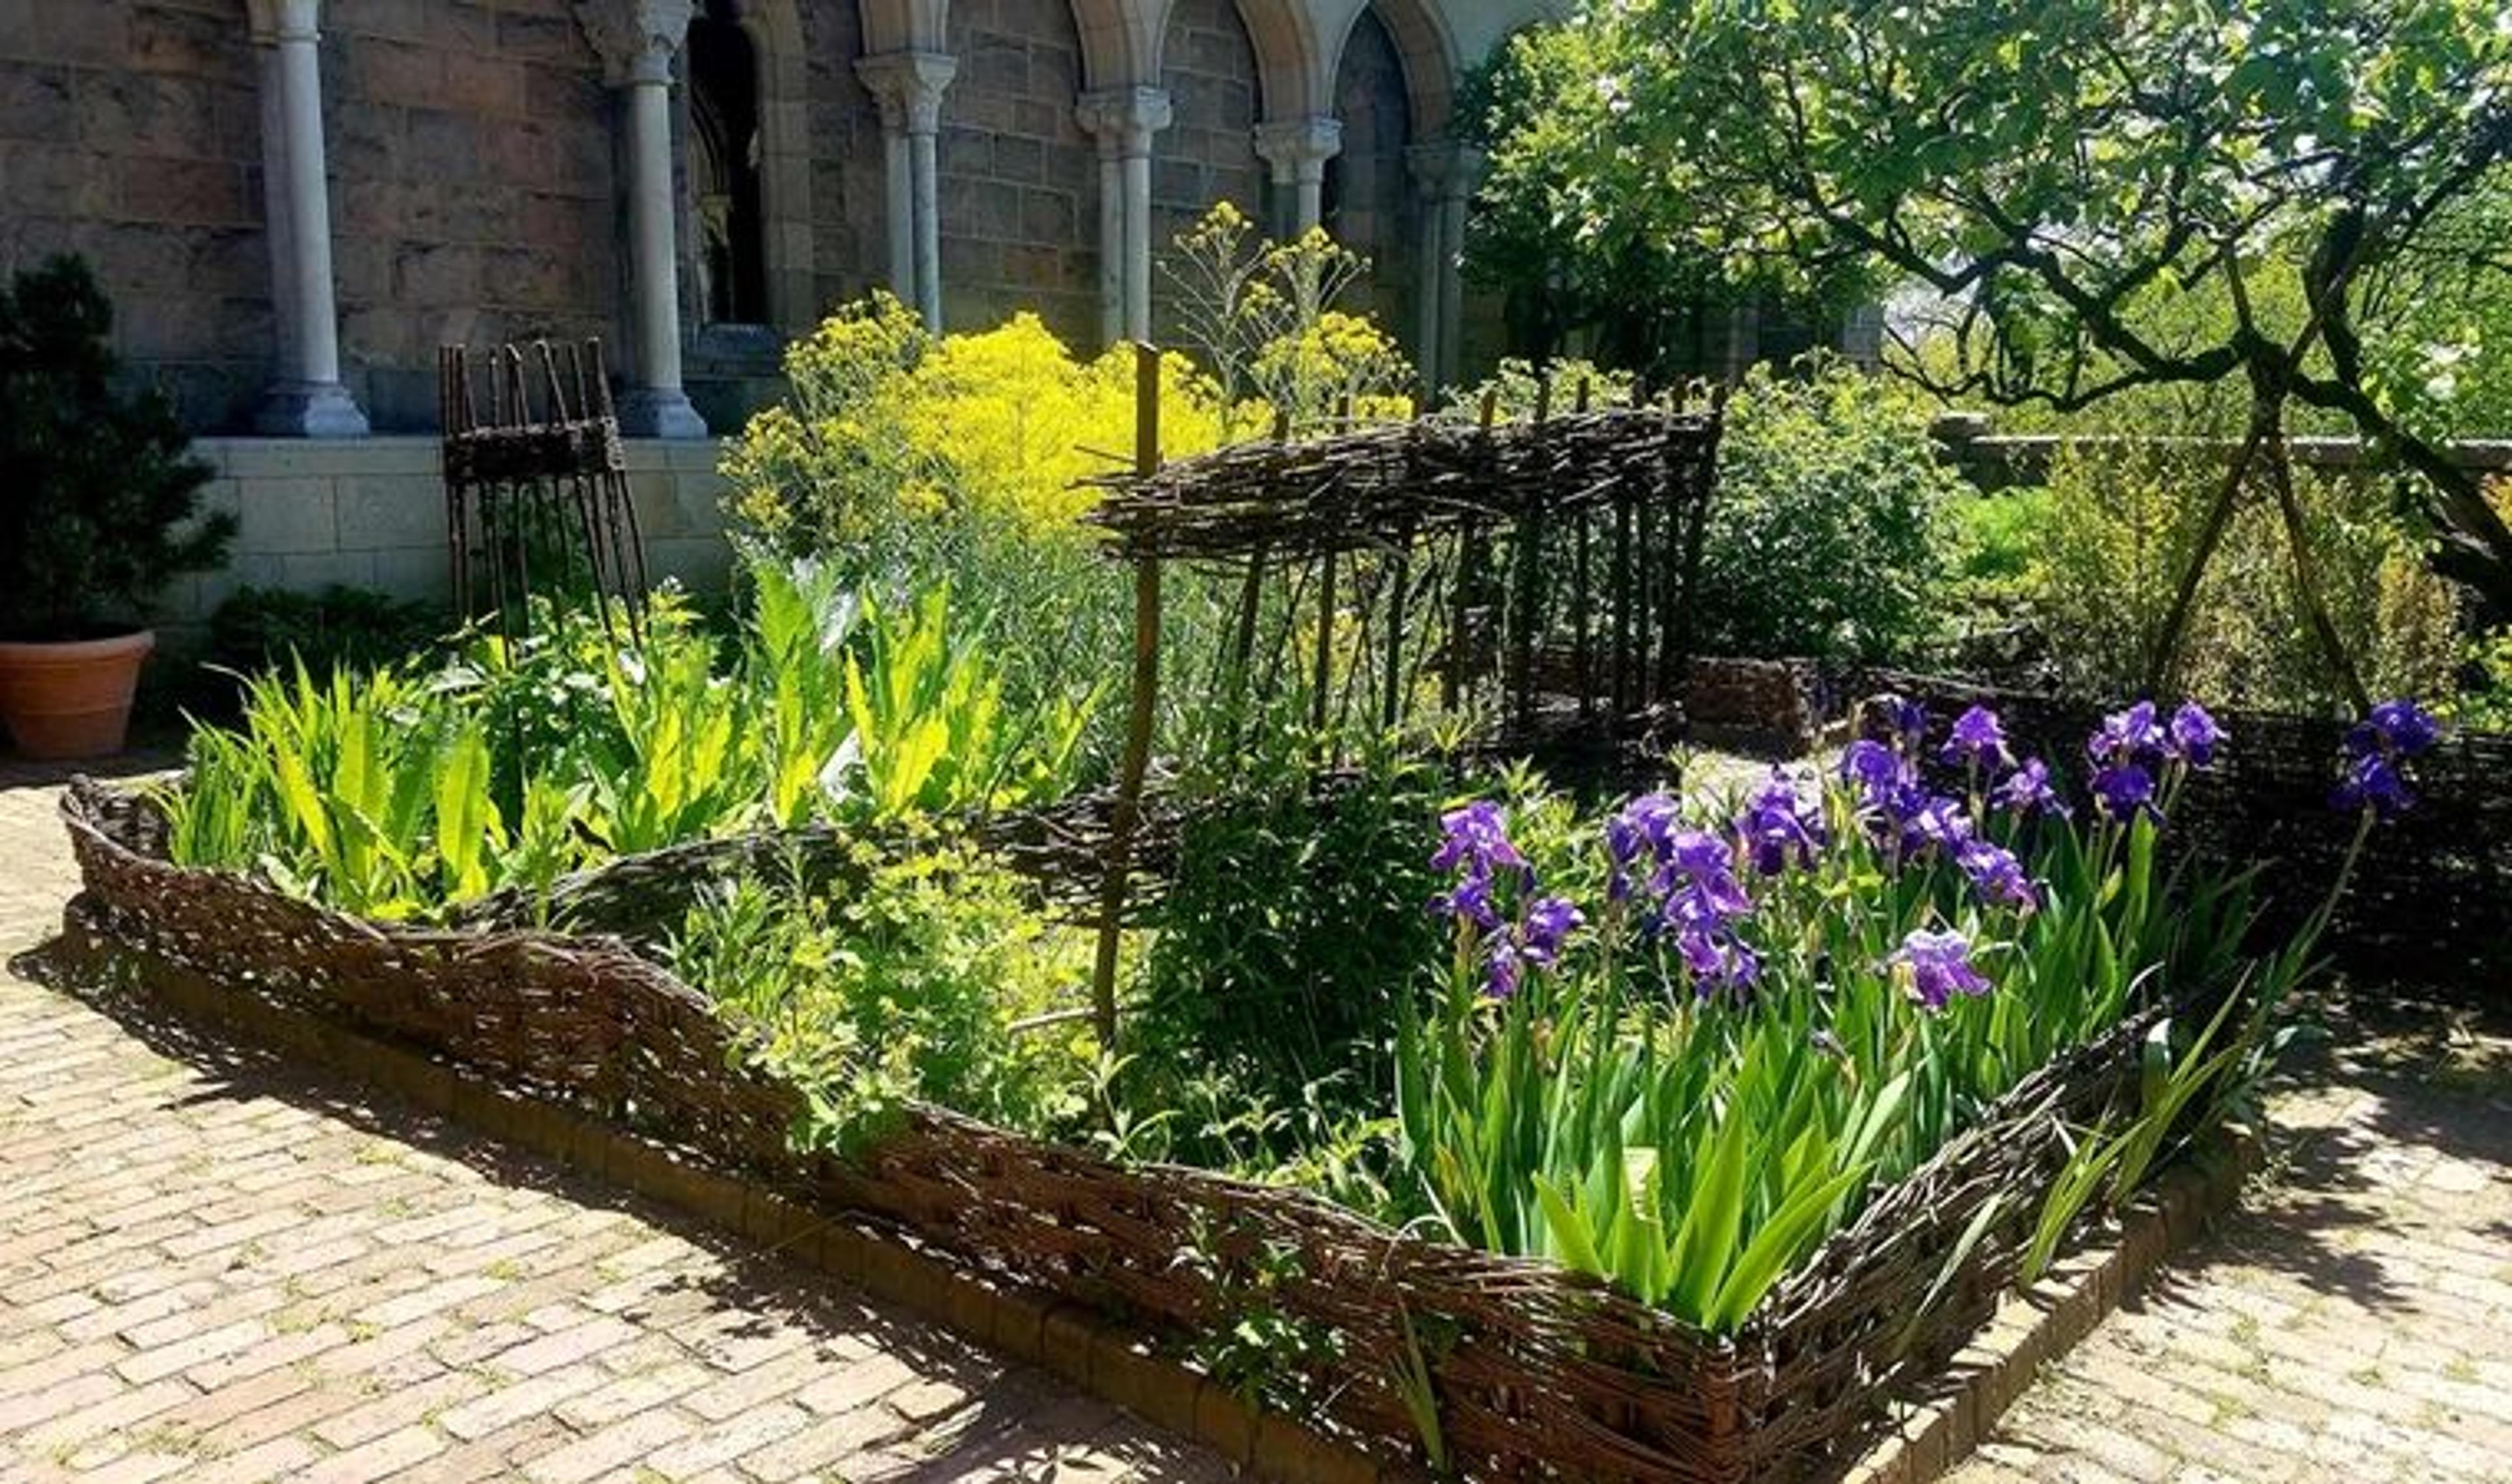 A garden bed full of flowers and herbs situated in a medieval cloister.